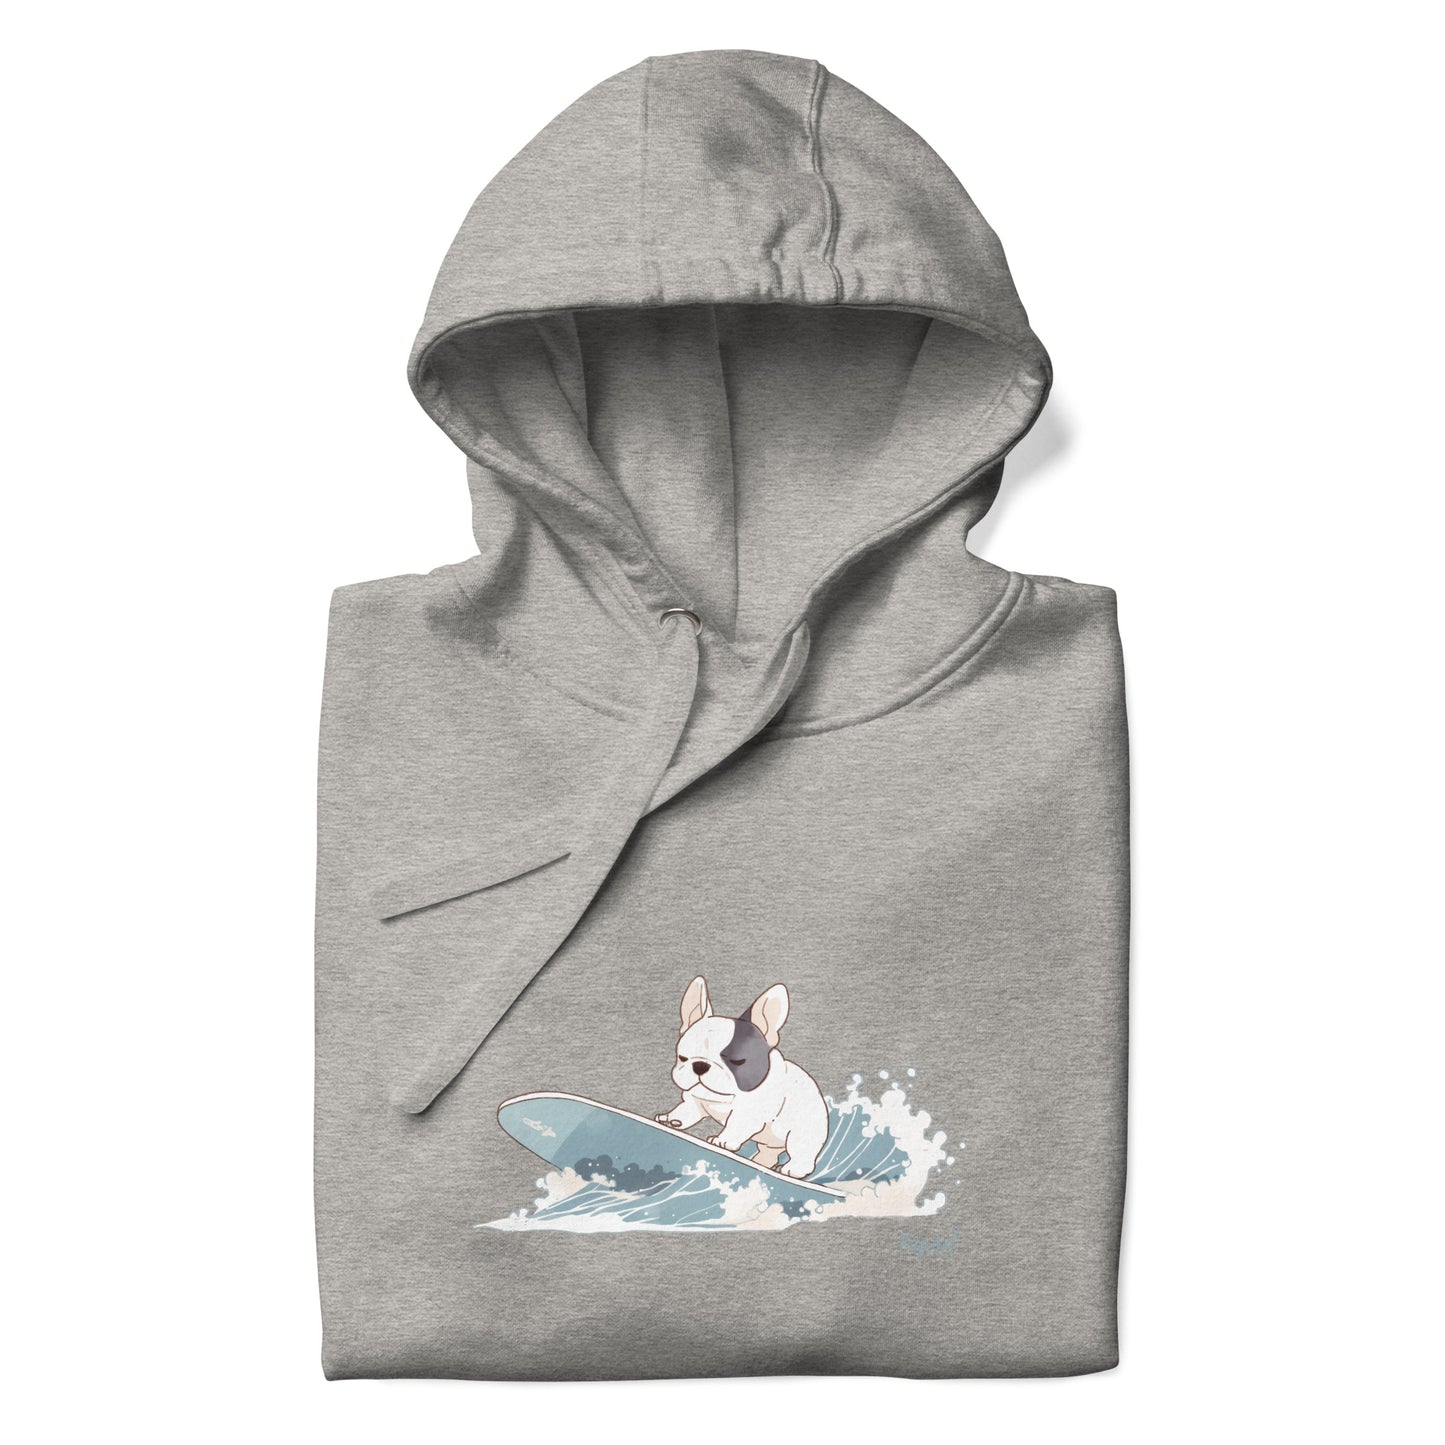 French bulldog pup surfing on a wave - Hoddie